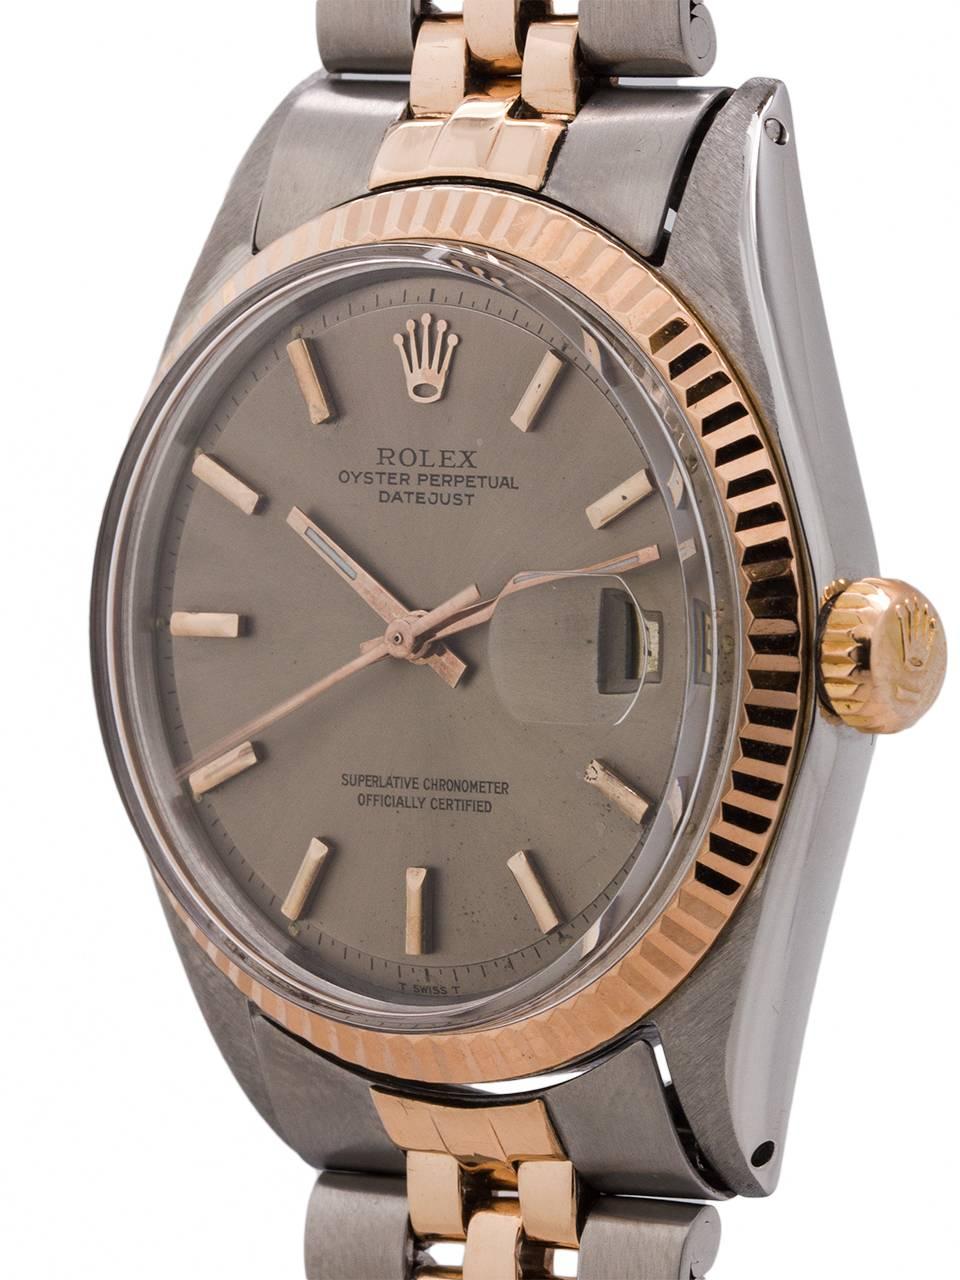 
Vintage man’s Rolex stainless steel and 14K pink gold Datejust ref 1601 serial # 2.1 million circa 1969. Full sized man’s model 36mm diameter Oyster case with 14K pink gold fluted bezel and acrylic crystal. With original “taupe gray” dial with